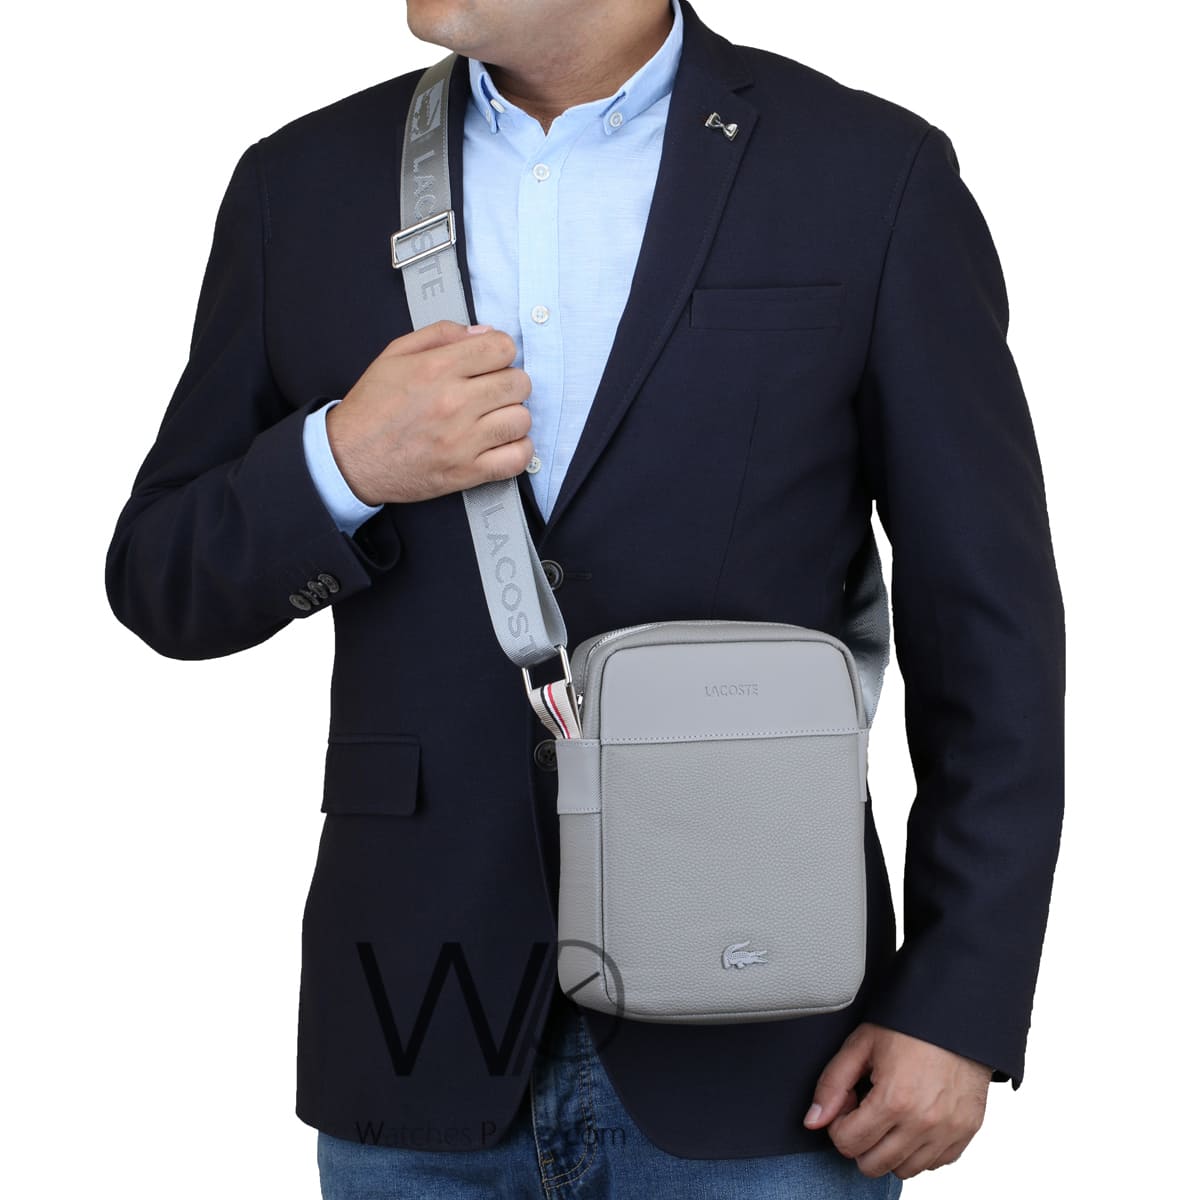 Crossbody Lacoste Messenger For Men | Watches Prime